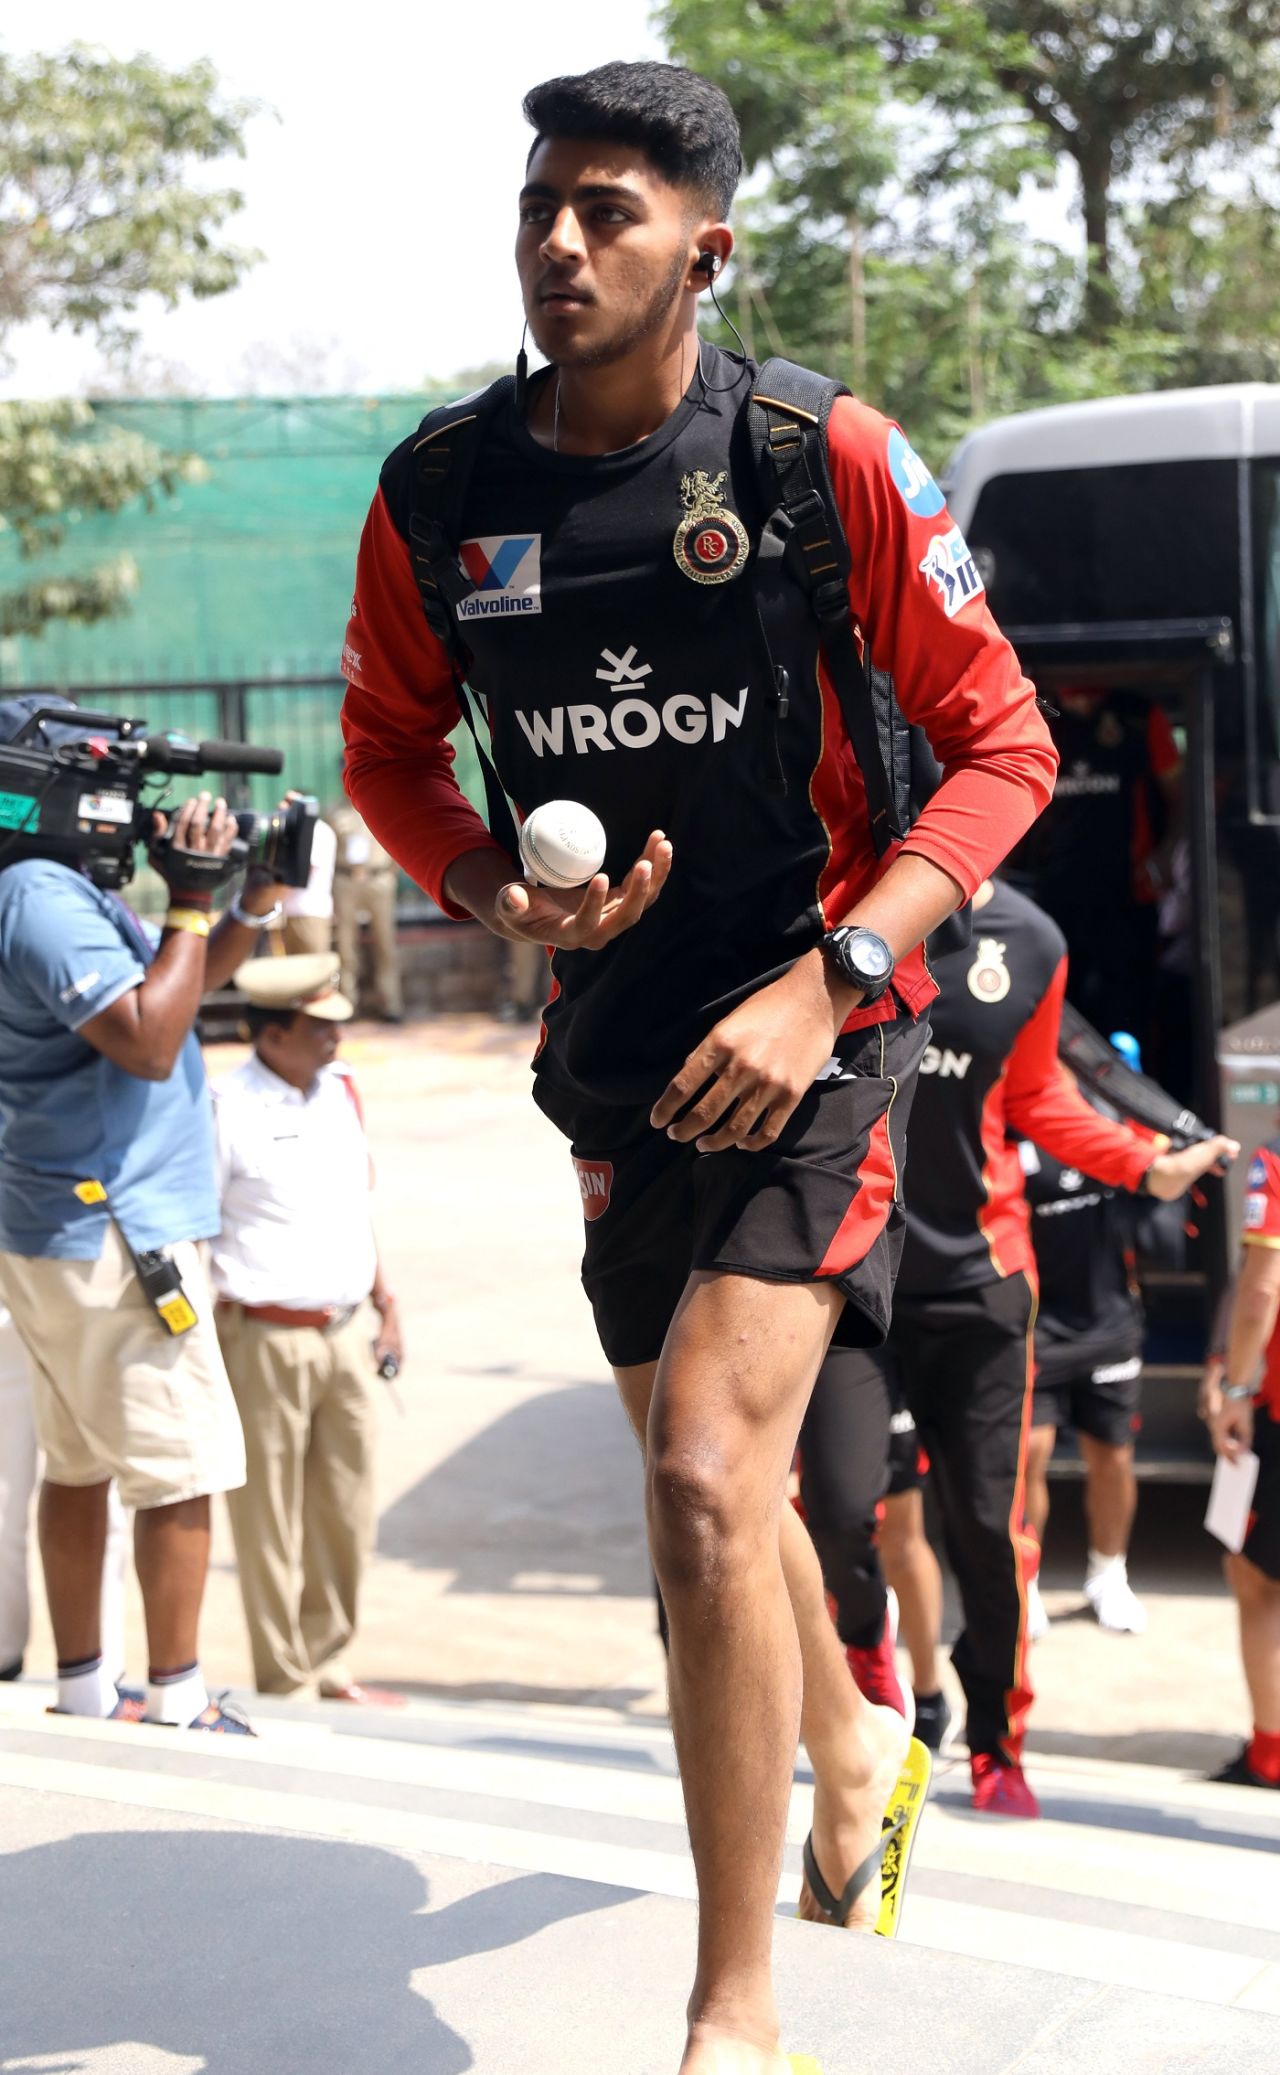 Prayas Ray Barman arrives for the match against Sunrisers Hyderabad, Sunrisers Hyderabad v Royal Challengers Bangalore, IPL 2019, Hyderabad, March 31, 2019